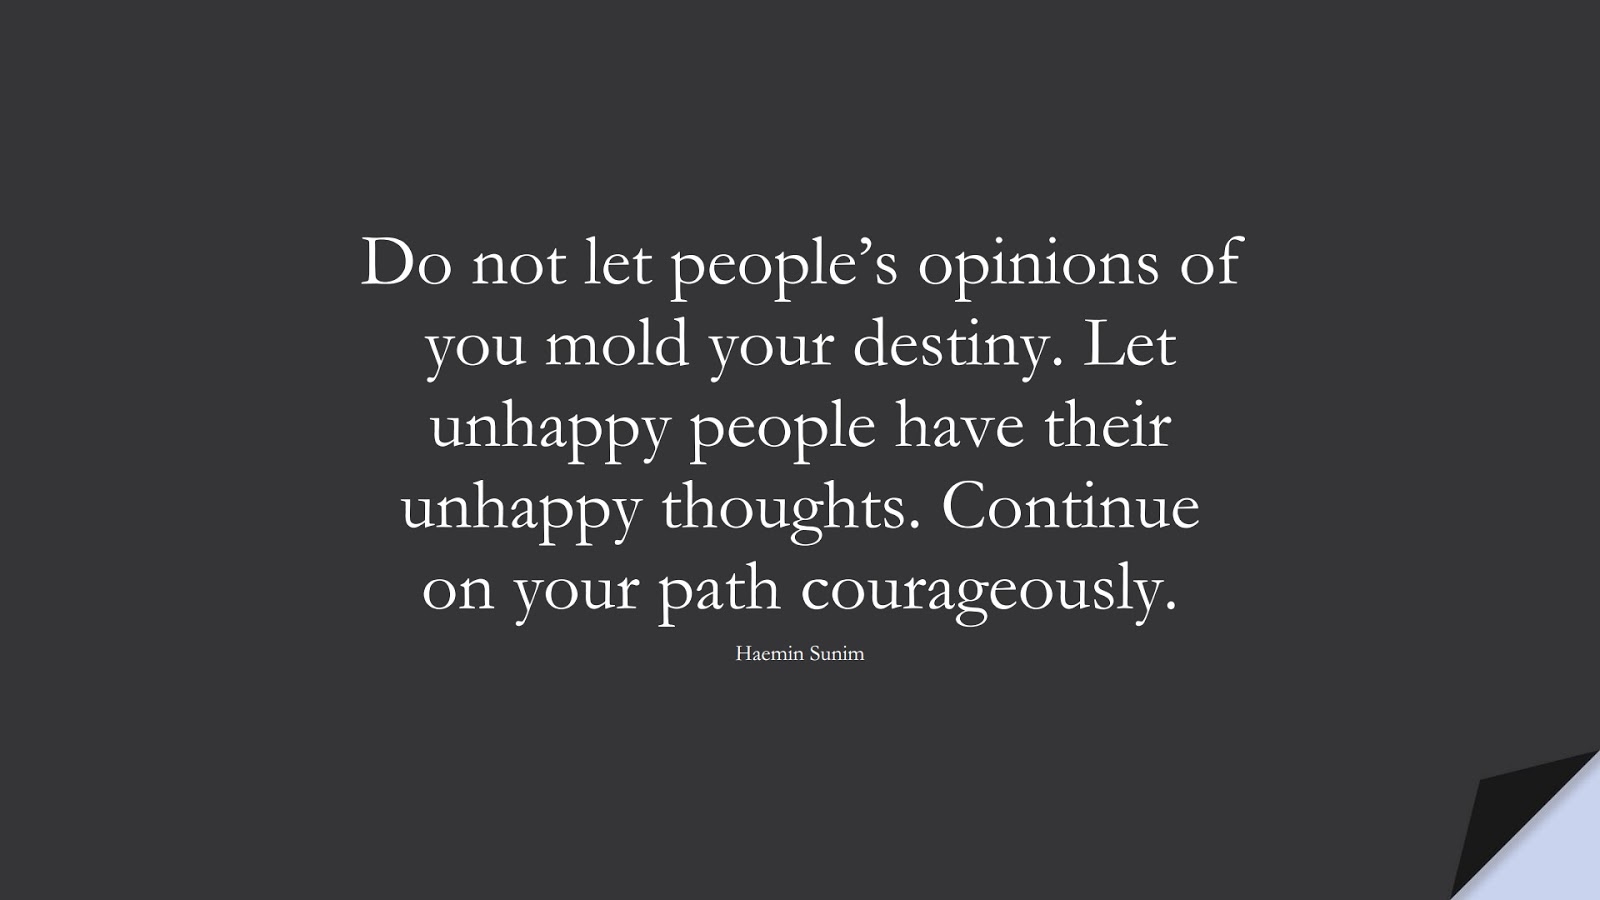 Do not let people’s opinions of you mold your destiny. Let unhappy people have their unhappy thoughts. Continue on your path courageously. (Haemin Sunim);  #EncouragingQuotes